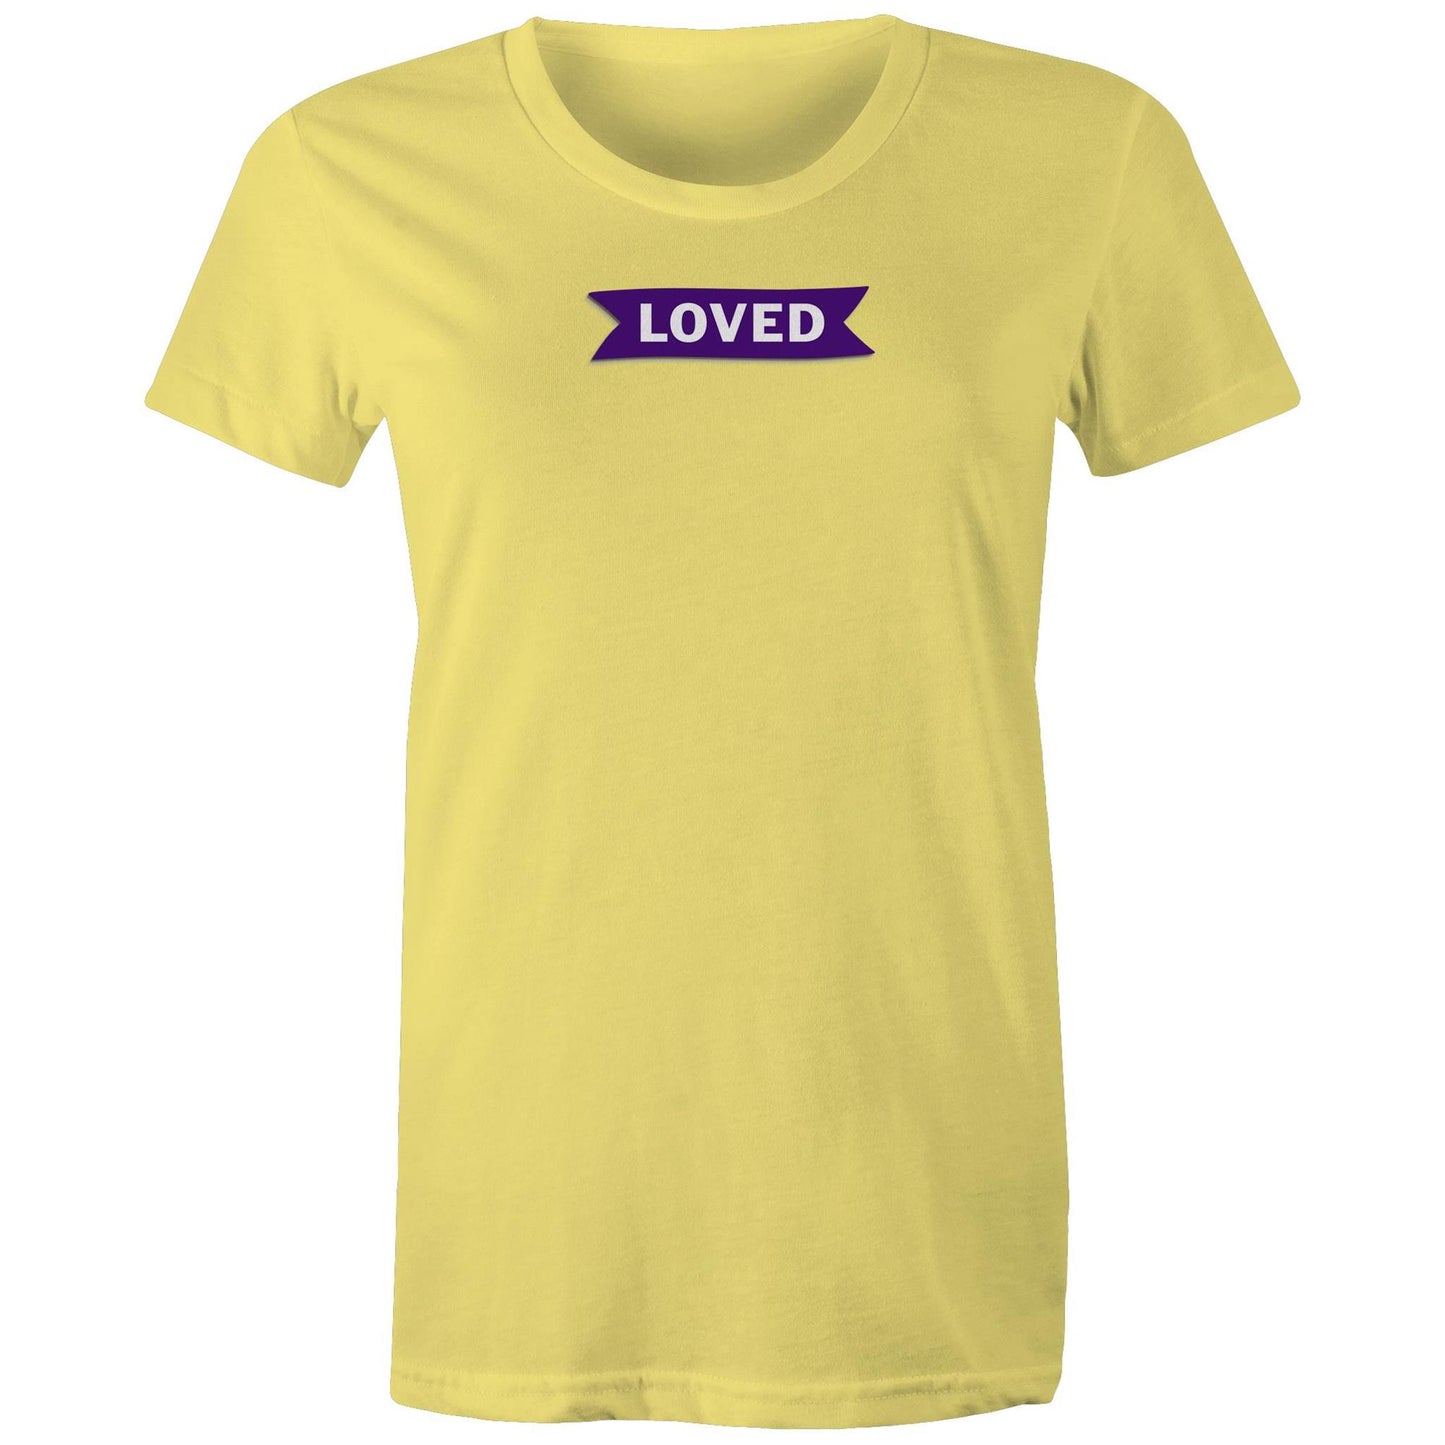 LOVED Ribbon T Shirts for Women